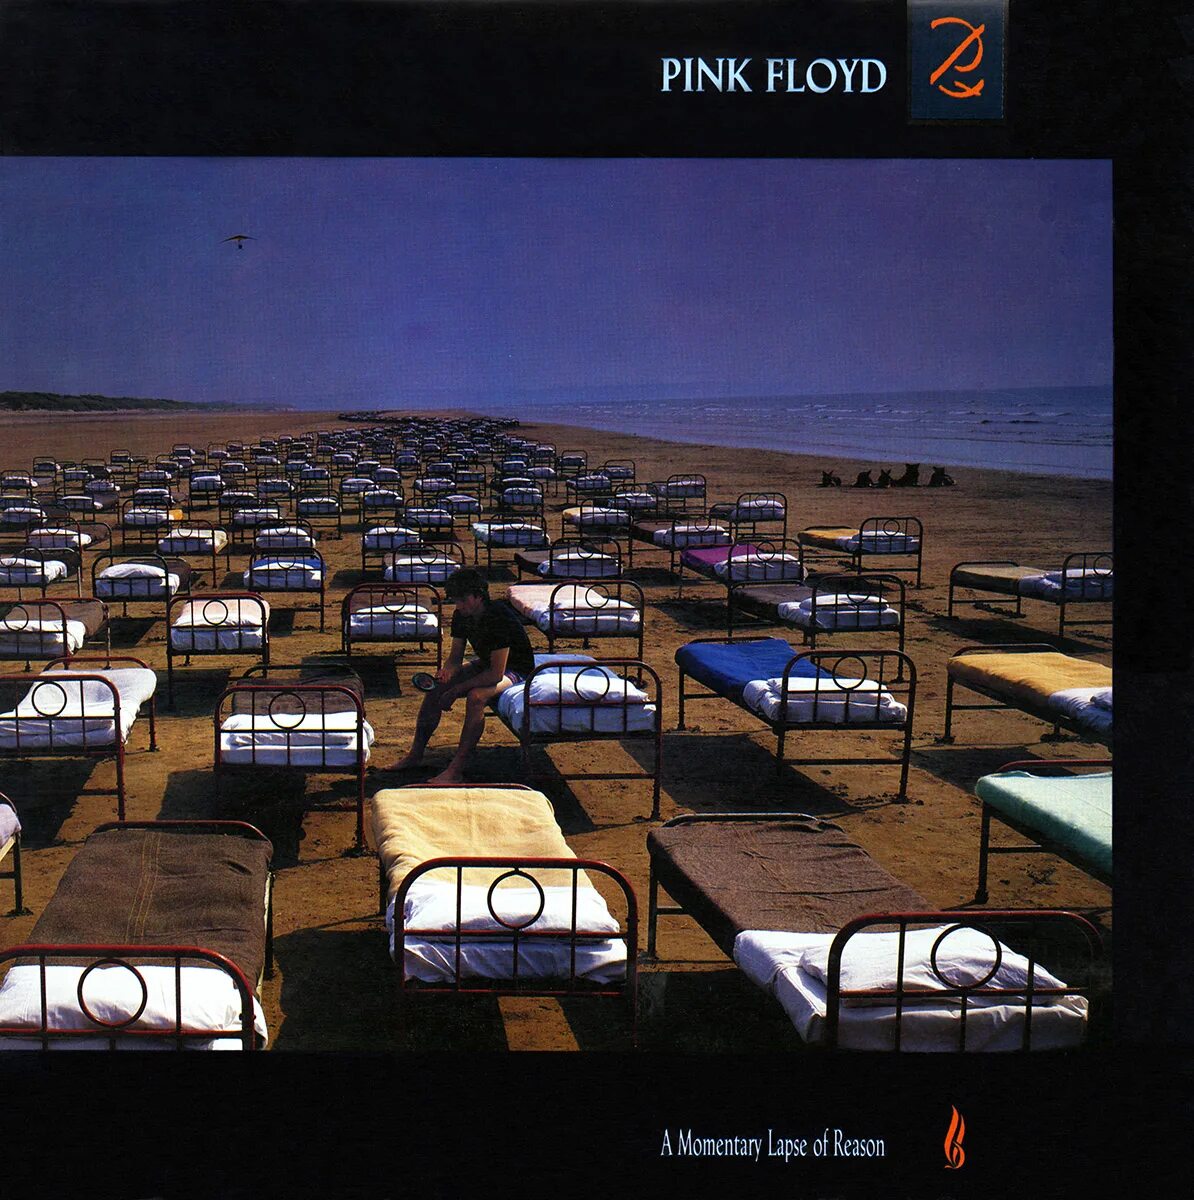 Momentary lapse of reasoning. Pink Floyd a Momentary lapse of reason. Pink Floyd a Momentary lapse of reason 1987. Pink Floyd a Momentary lapse of reason обложка. Pink Floyd a Momentary lapse of reason фото.